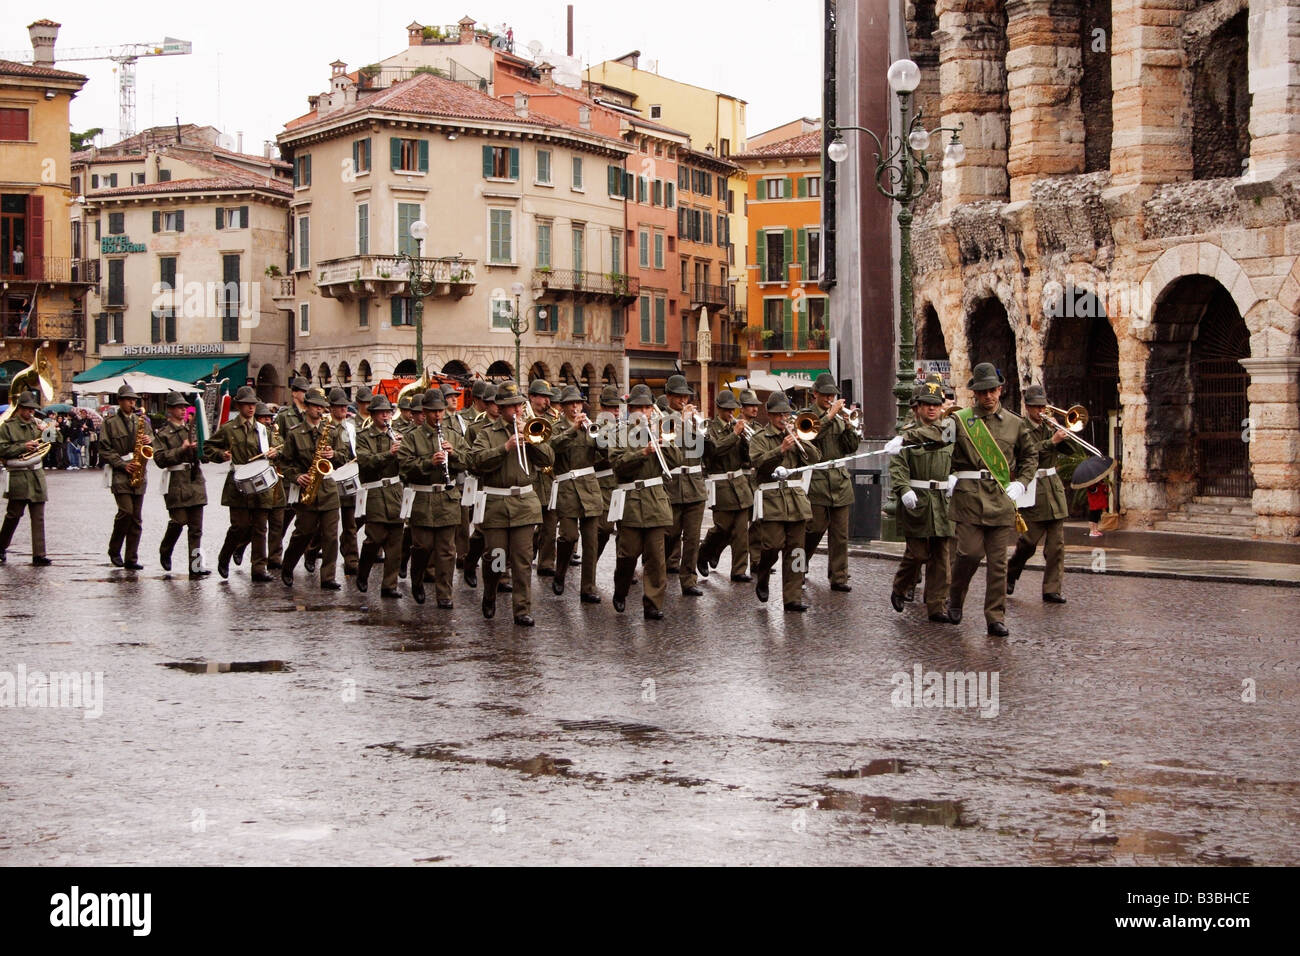 The Alpine Brigade, Julia, marching in front of the Arena, Verona, Italy. Stock Photo